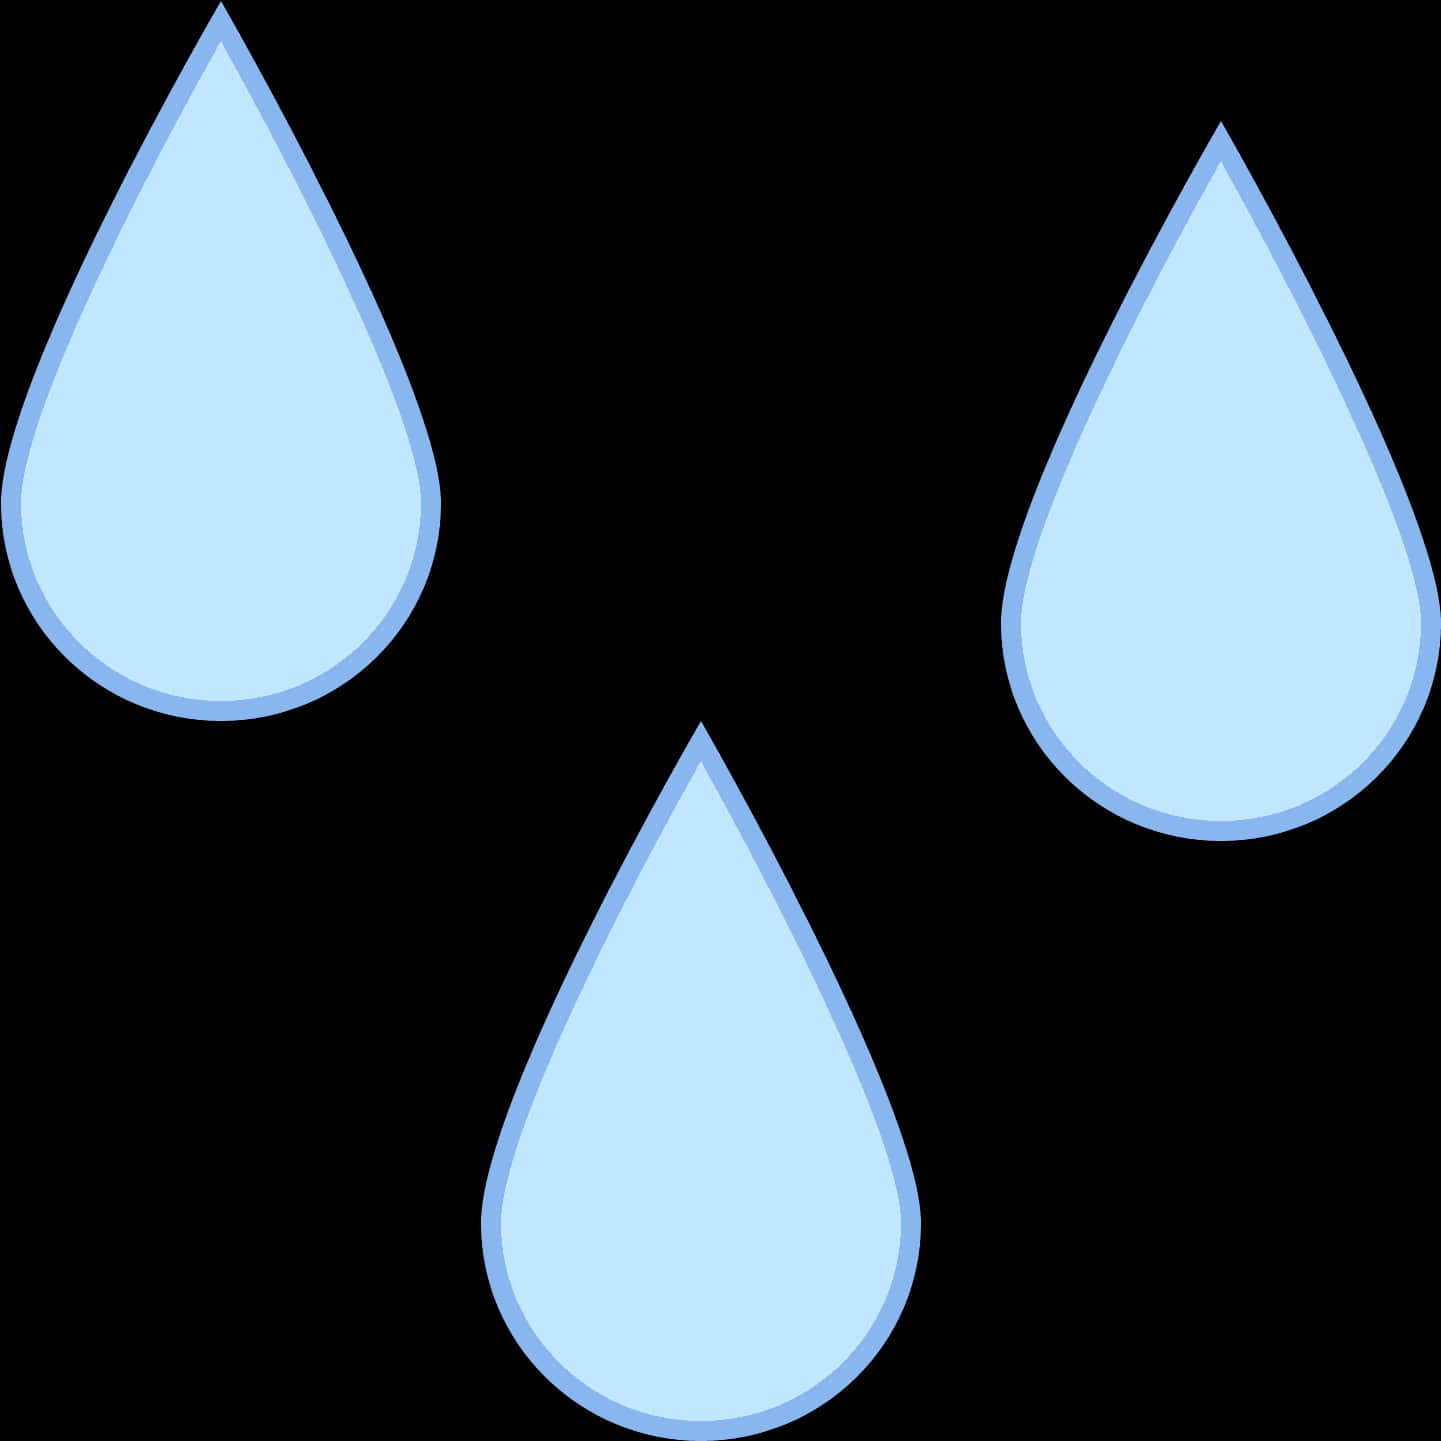 Blue Water Drops Vector Illustration PNG